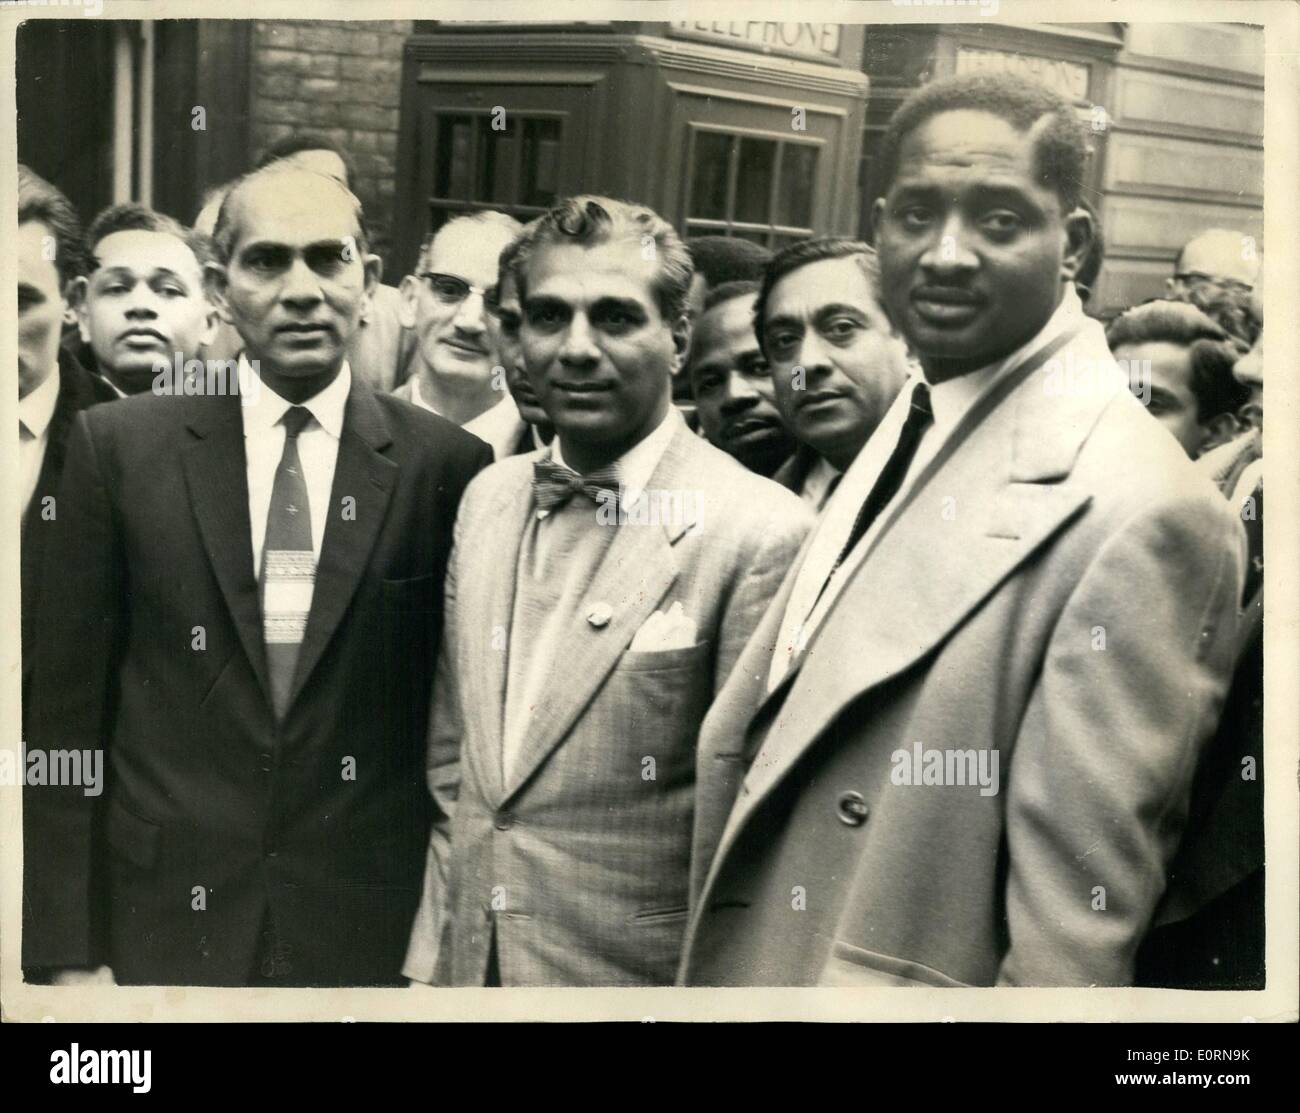 Mar. 03, 1960 - Dr. Jagan Goes To Bow-Street To Give Evidence: Dr. Cheddi Jagan, British Guiana's Minister for Trade and Industry, went to Bow Street today give evidence following the arrest yesterday of two of his colleagues on a delegation discussing constructional reforms with the Colonel Office. They are mr. Jai Narine Singh, 51 years old leader of the Genuineness Independent Movement, and Mr.Linden Forebes Samson Burnham: 37, leader of the Guinan People's National Congress. Photo Shows Mr. Cheddi Jagan (center), picture with Mr. Singh (left) and Mr. Burnham today. Stock Photo